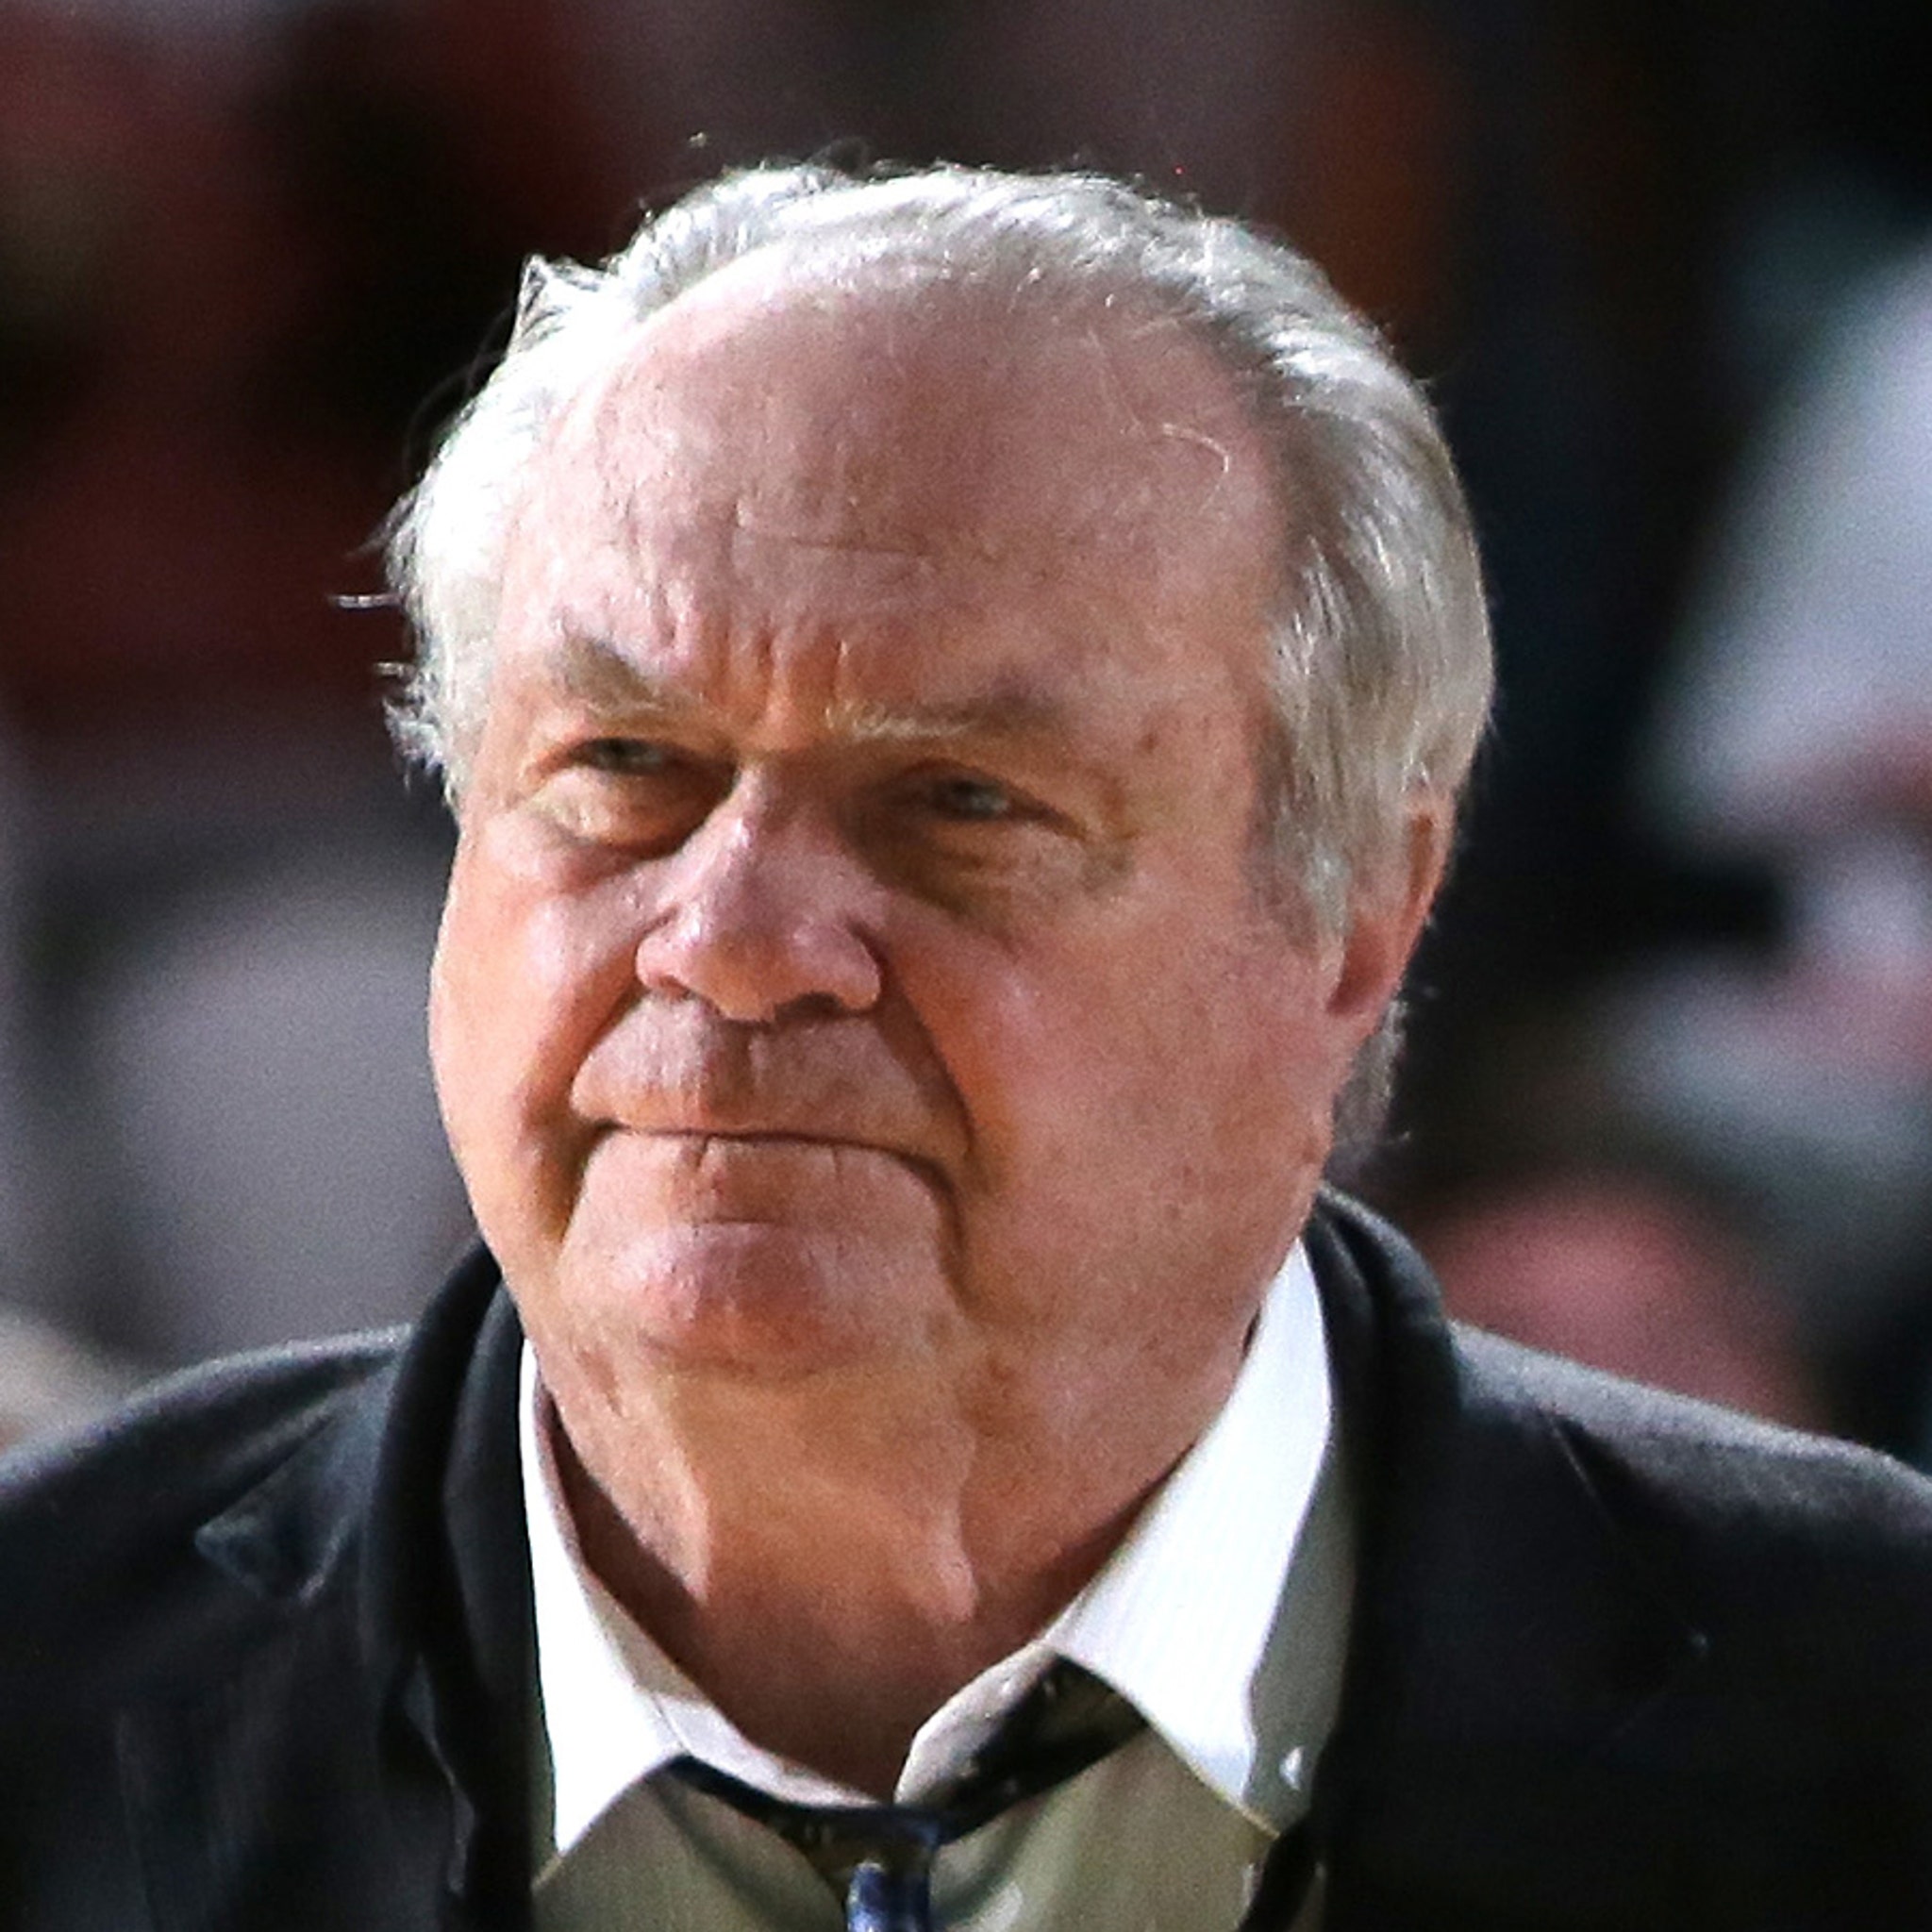 Tommy Heinsohn hasn't changed much in the last 47 years